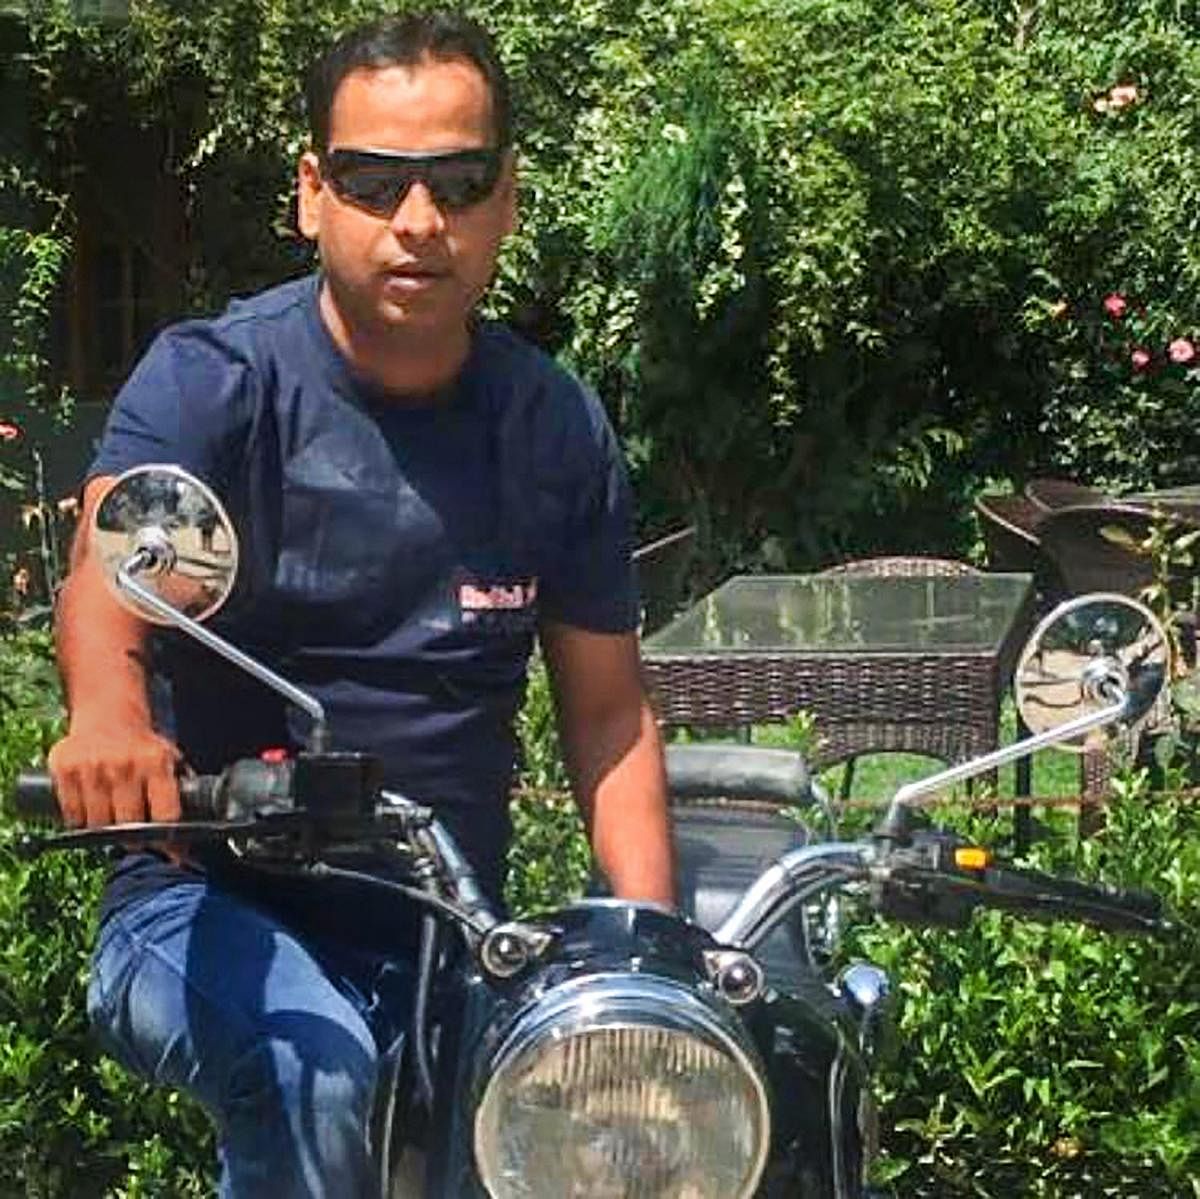 Vivek Tiwari, who was an executive with Apple, was shot dead by a cop early last Saturday.